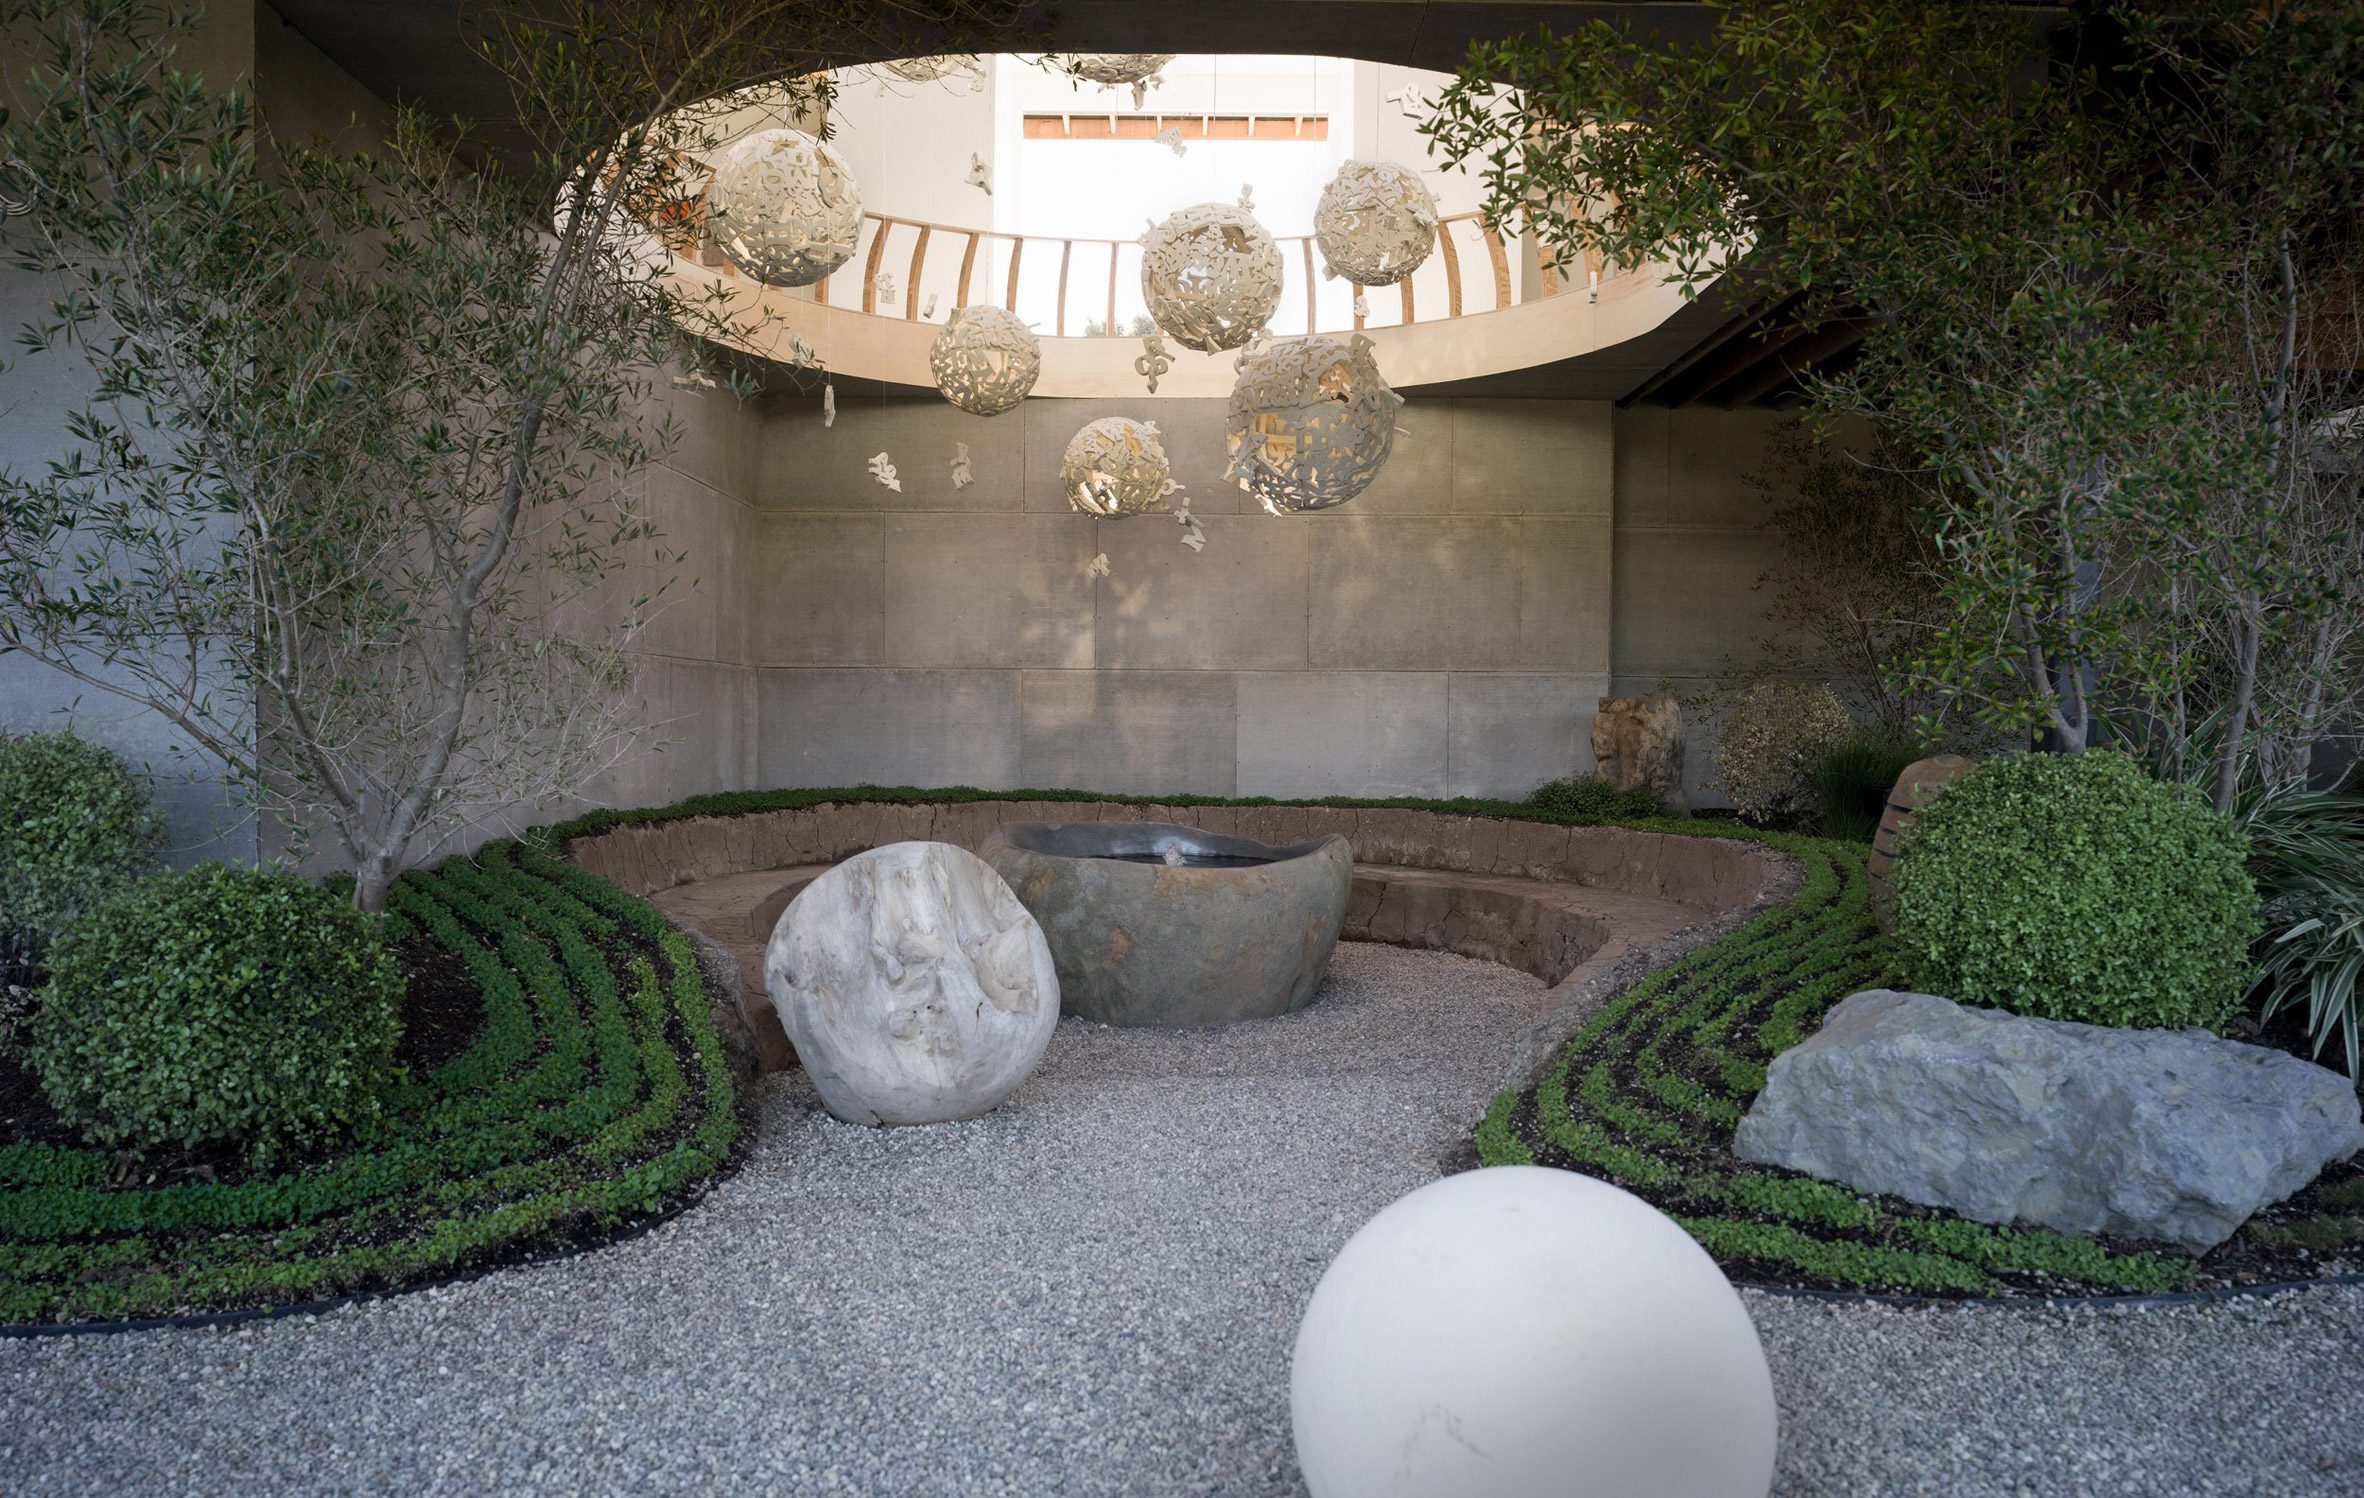 Circular opening an a ceiling with spheres hanging over a conversation pit